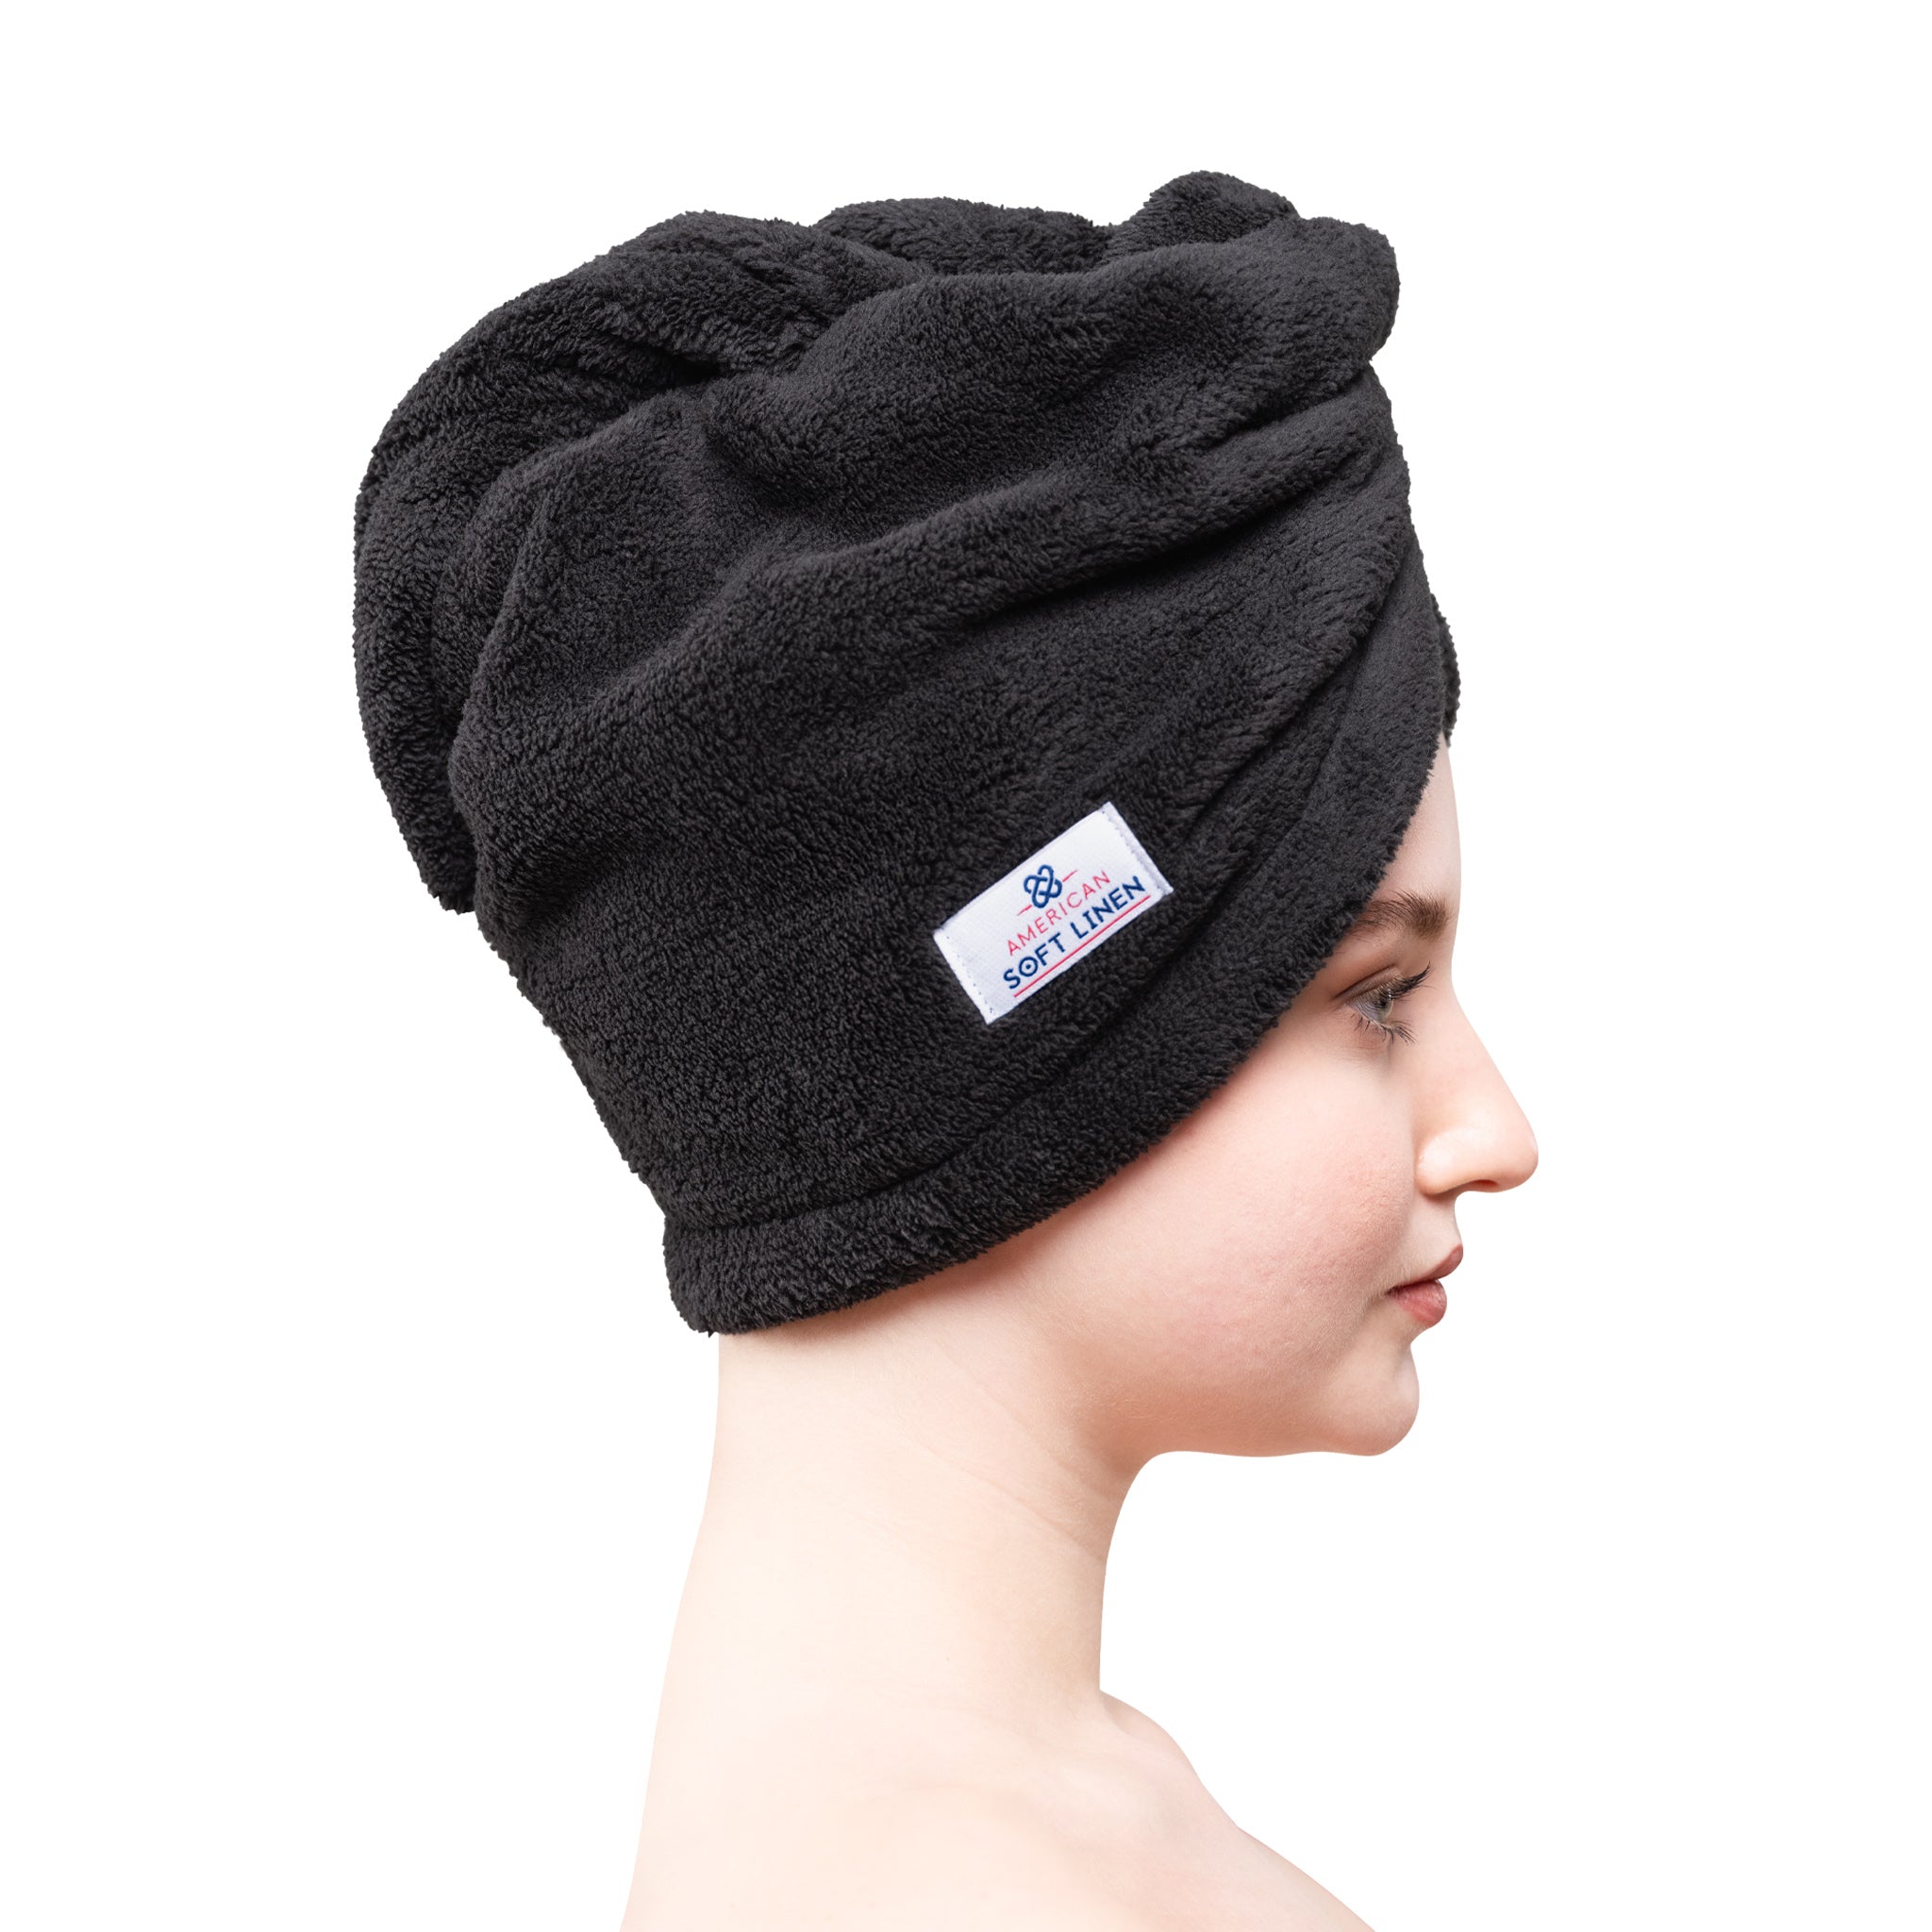 American Soft Linen Extremely Soft Super Absorbent and Fast Drying Hair Towel -2-packed-black-2